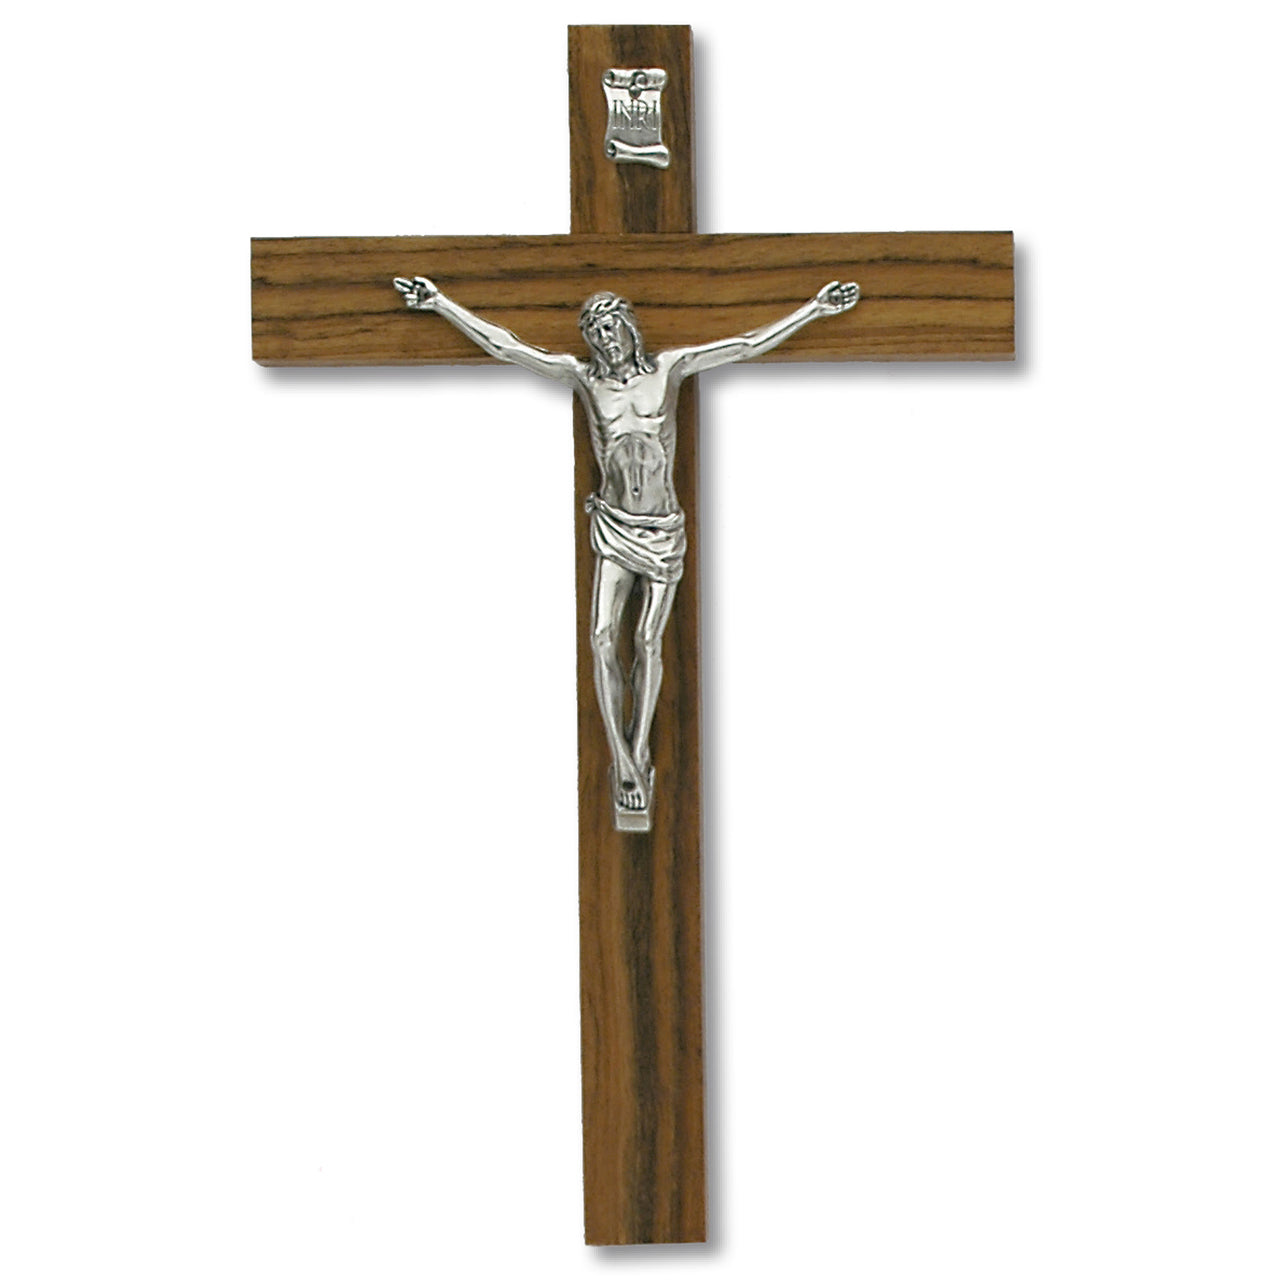 Striated- Wood Wall Cross with Silver Tone Corpus